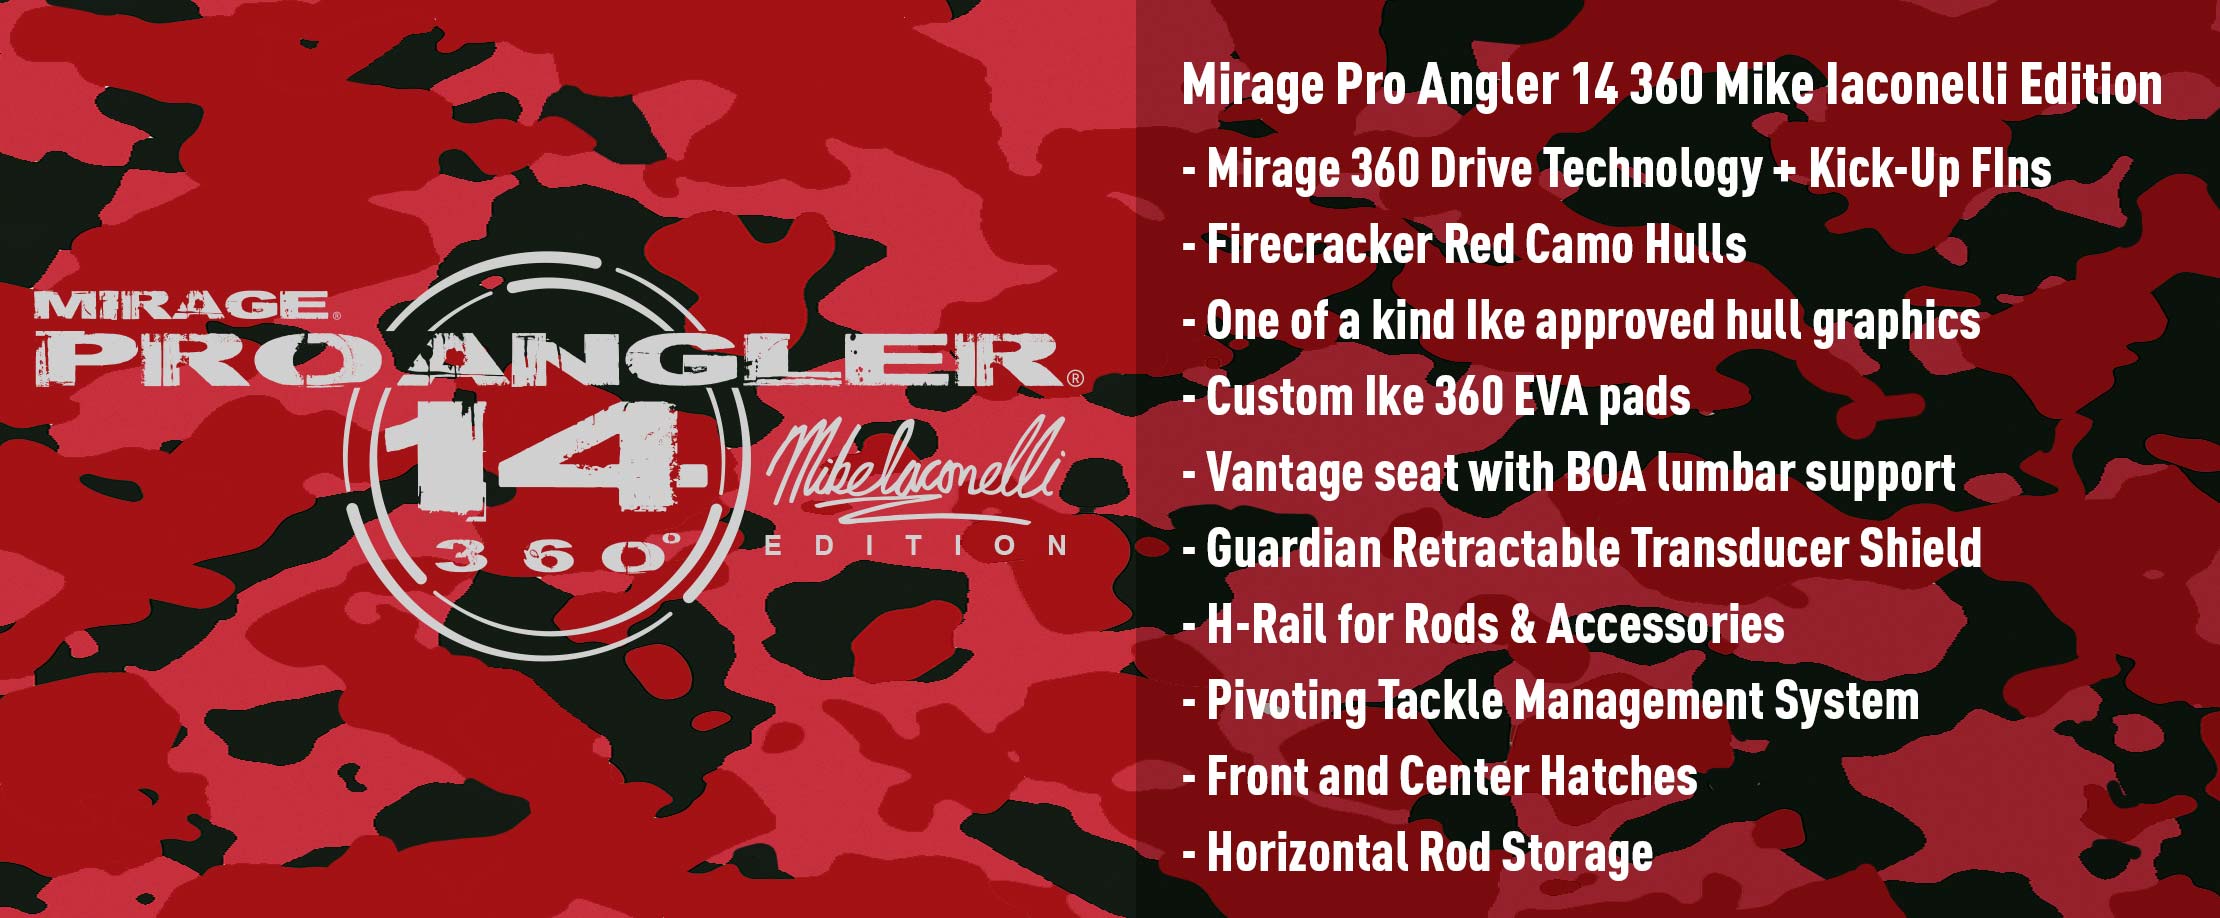 Mirage Pro Angler 14 360 Mike Iaconelli Edition Features